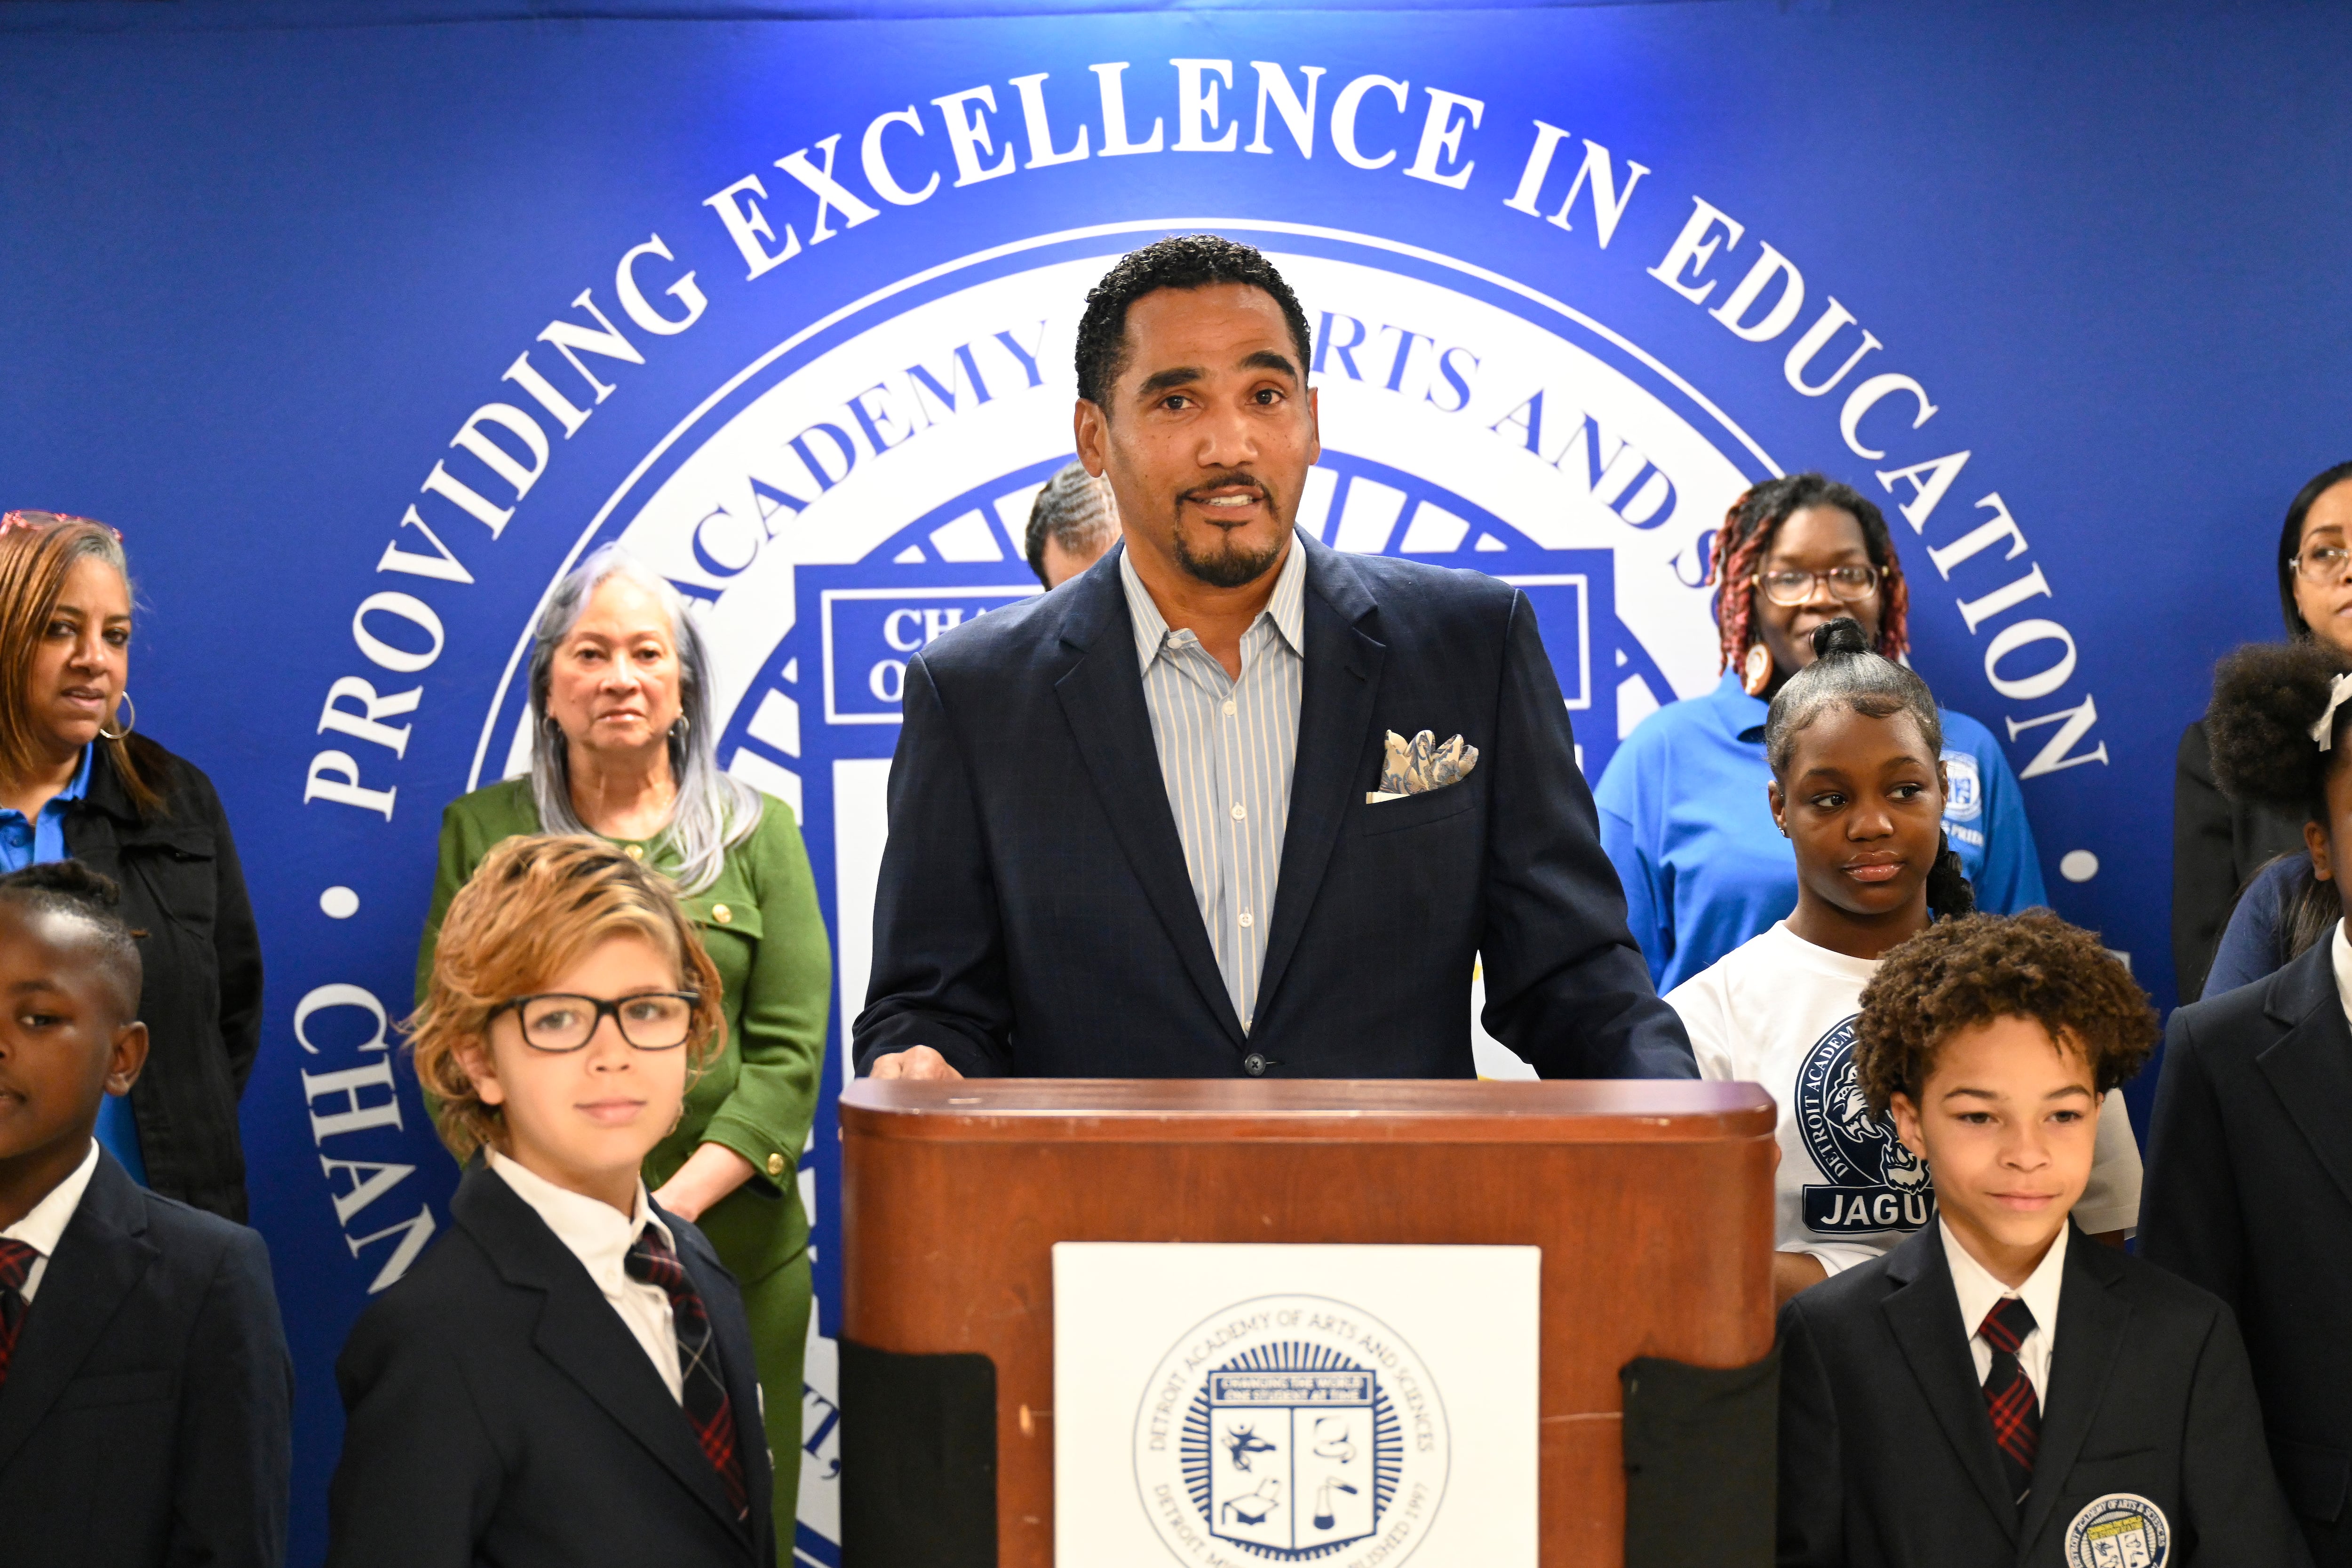 A school leader stands behind a podium, surrounded by students and staff.